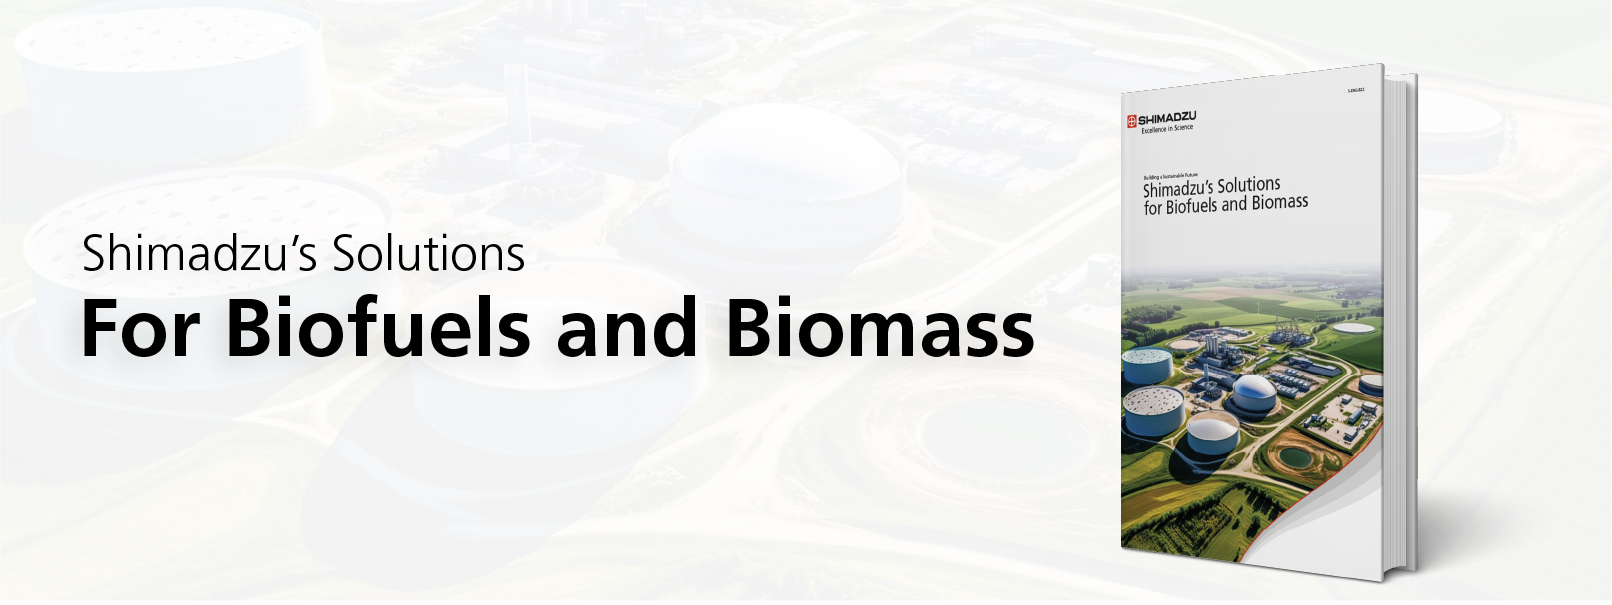 Shimadzu's Solutions For Biofuels and Biomass